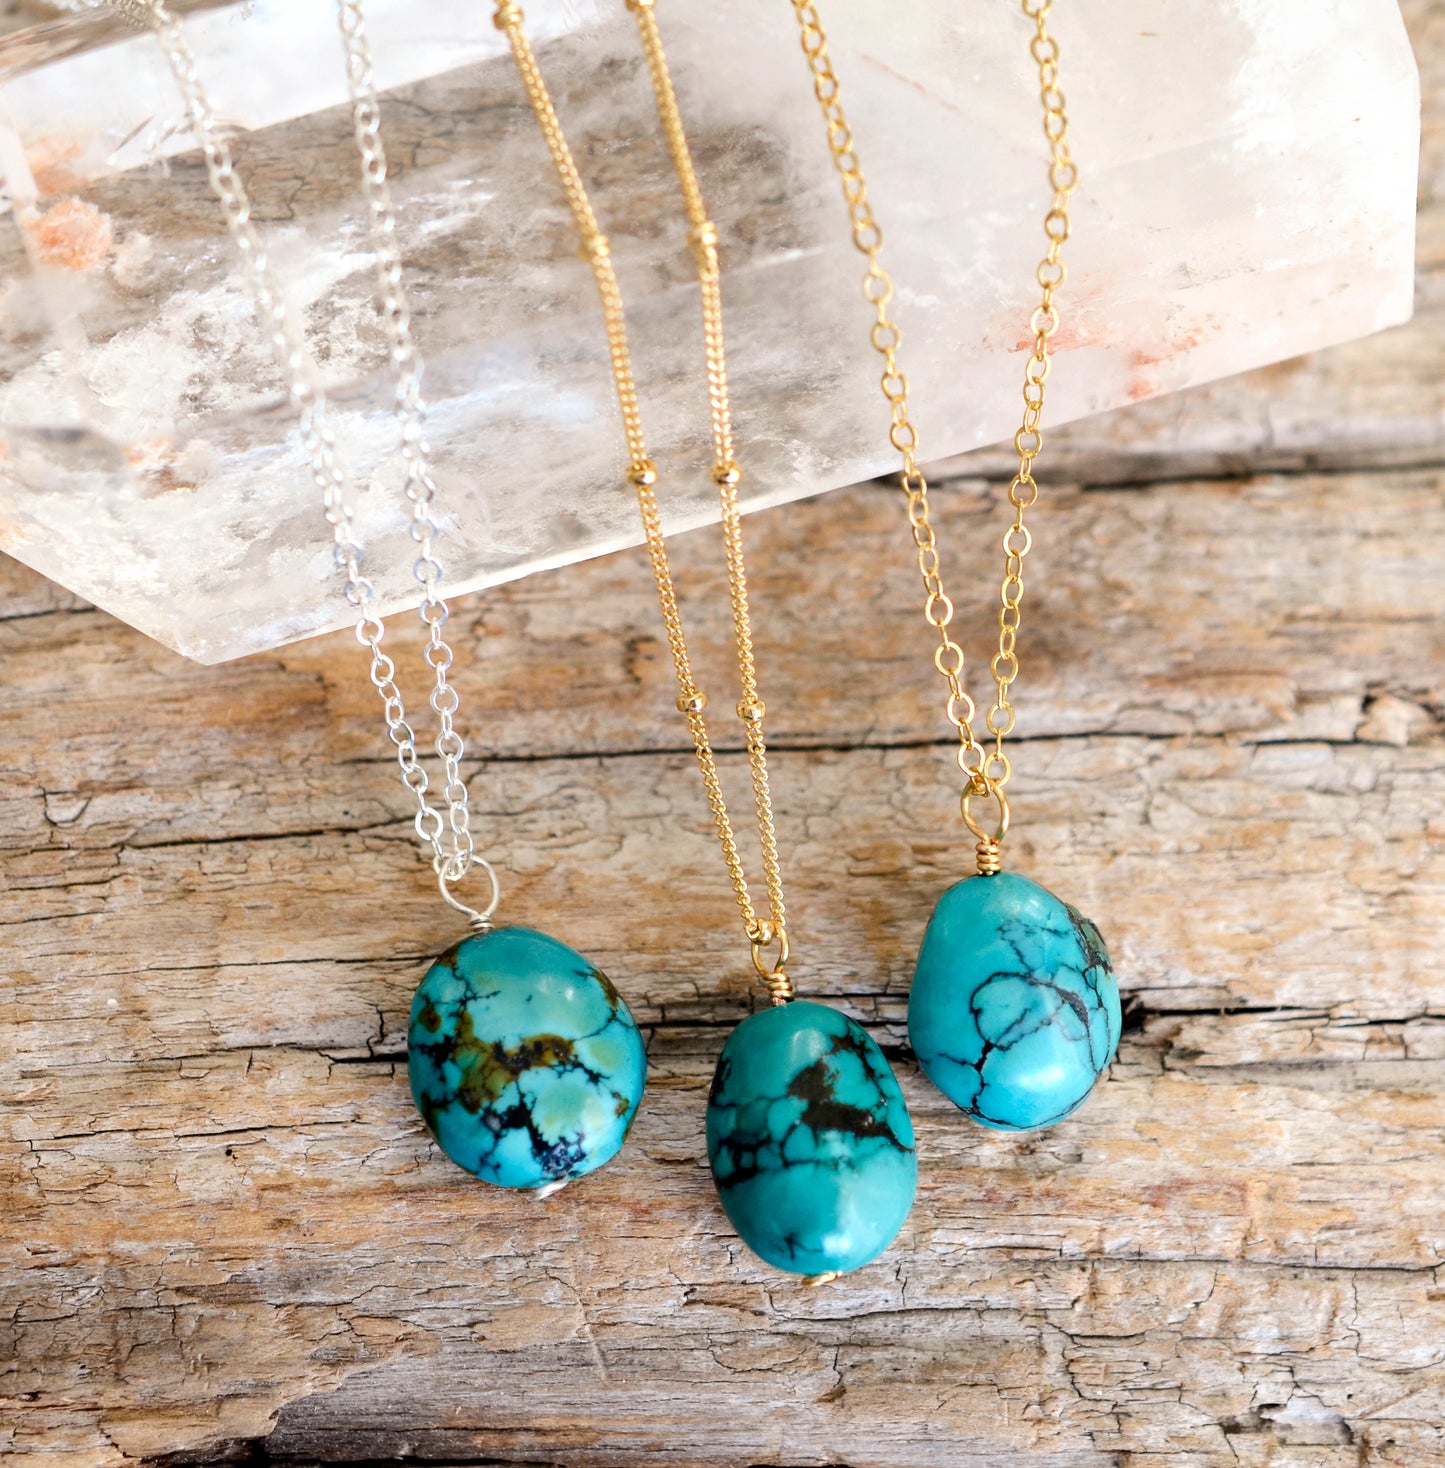 Genuine Turquoise Necklace, Natural Chunky Turquoise Pendant, December Birthstone, Sterling Silver or Gold Filled